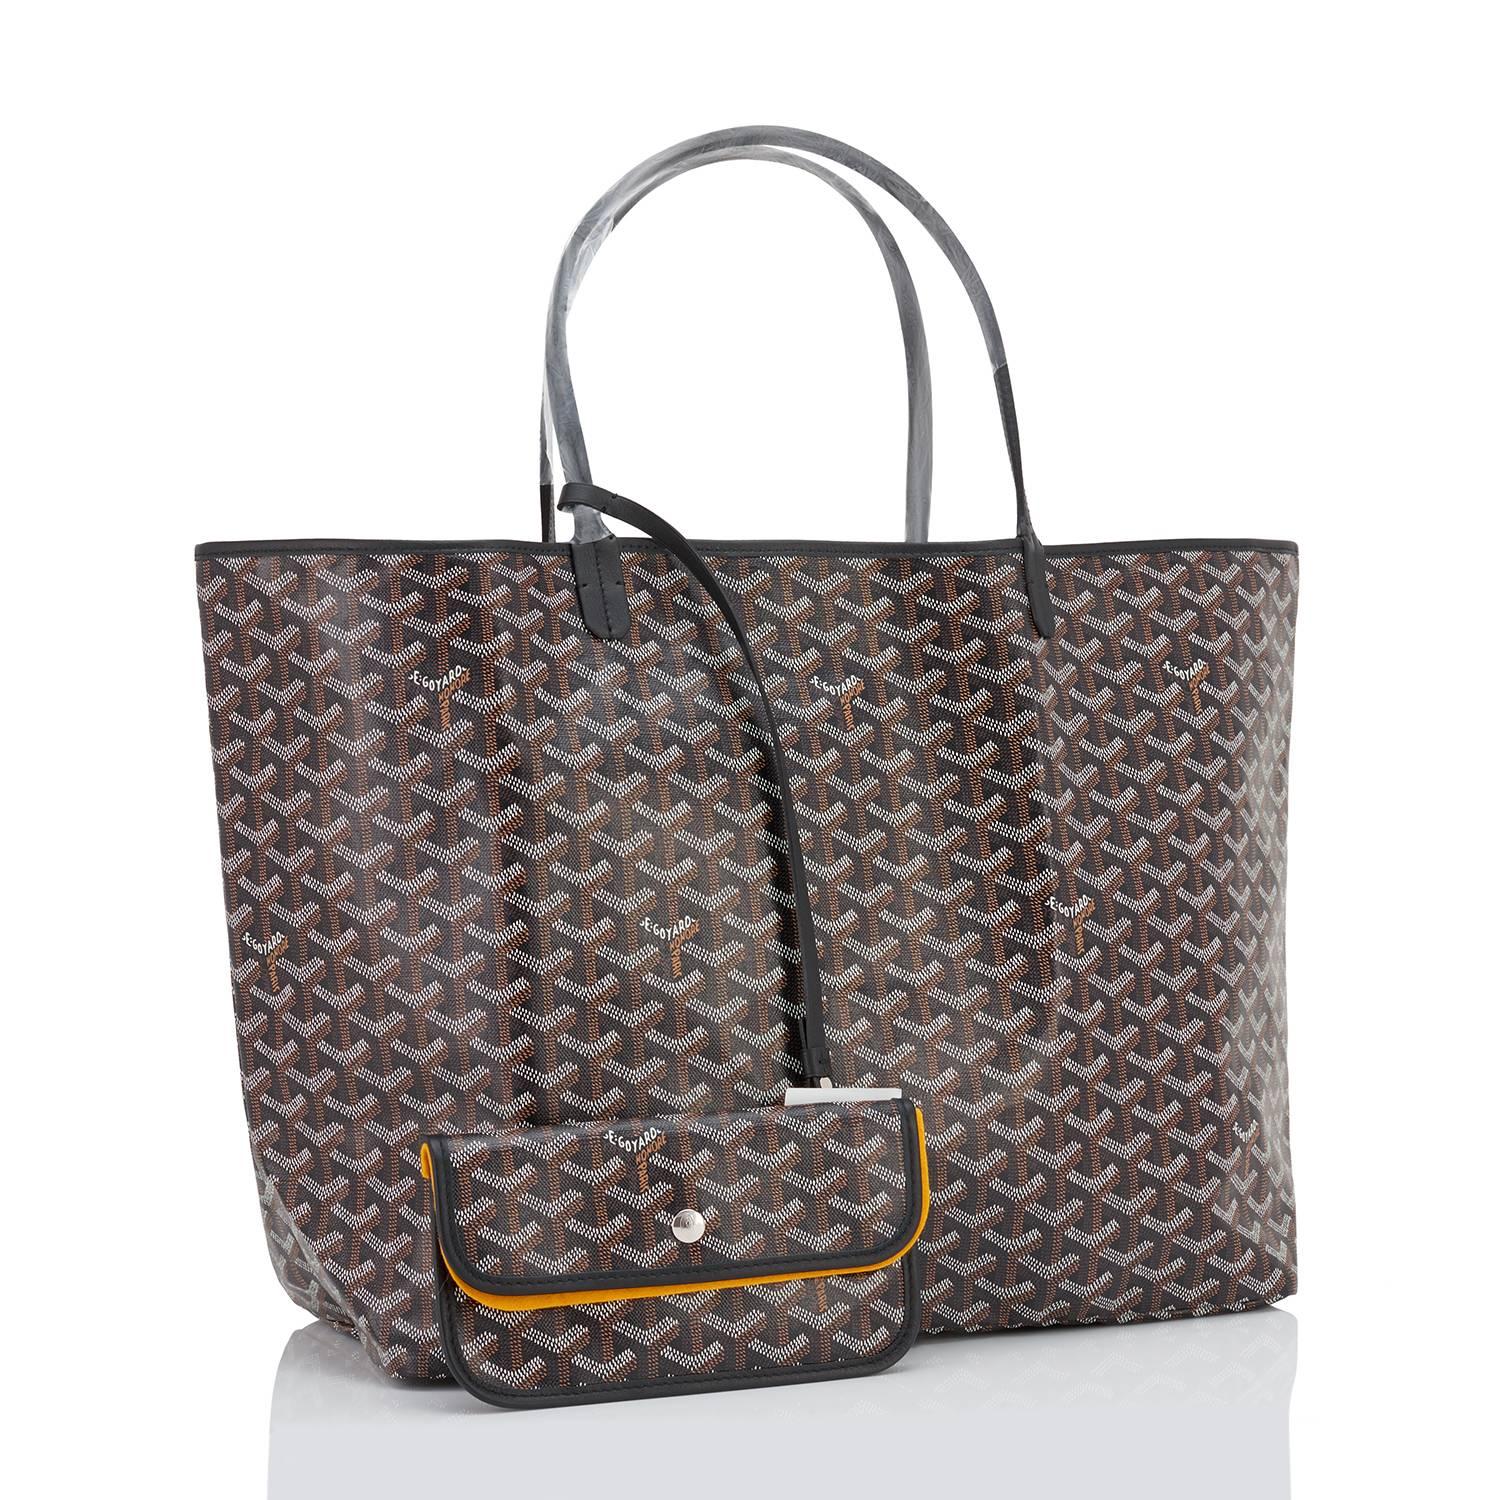 Goyard St Louis GM Grey Chevron Tote Bag Chic
Brand New. Store Fresh. Pristine Condition (with plastic on handles)
Perfect gift! Comes with yellow Goyard sleeper, inner organizational pochette with inner yellow protective felt.
This is the